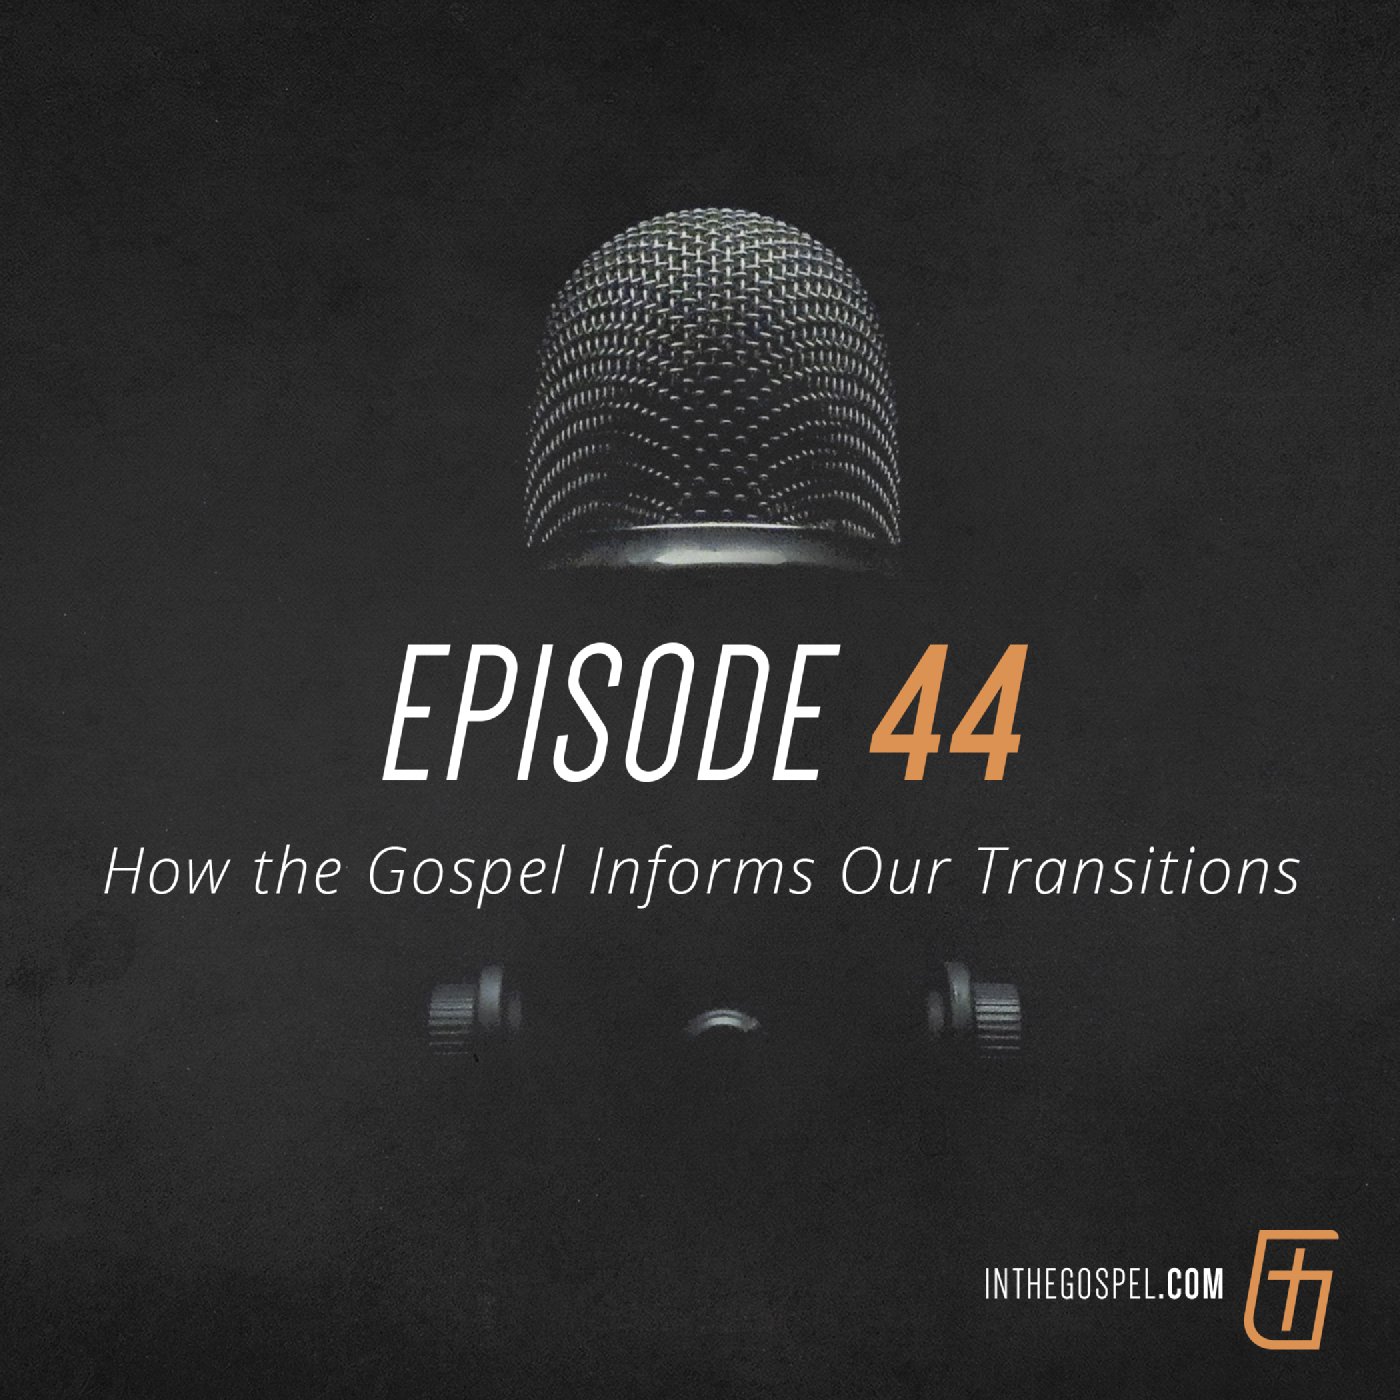 Episode 44: How the Gospel Informs Our Transitions (Part 2)